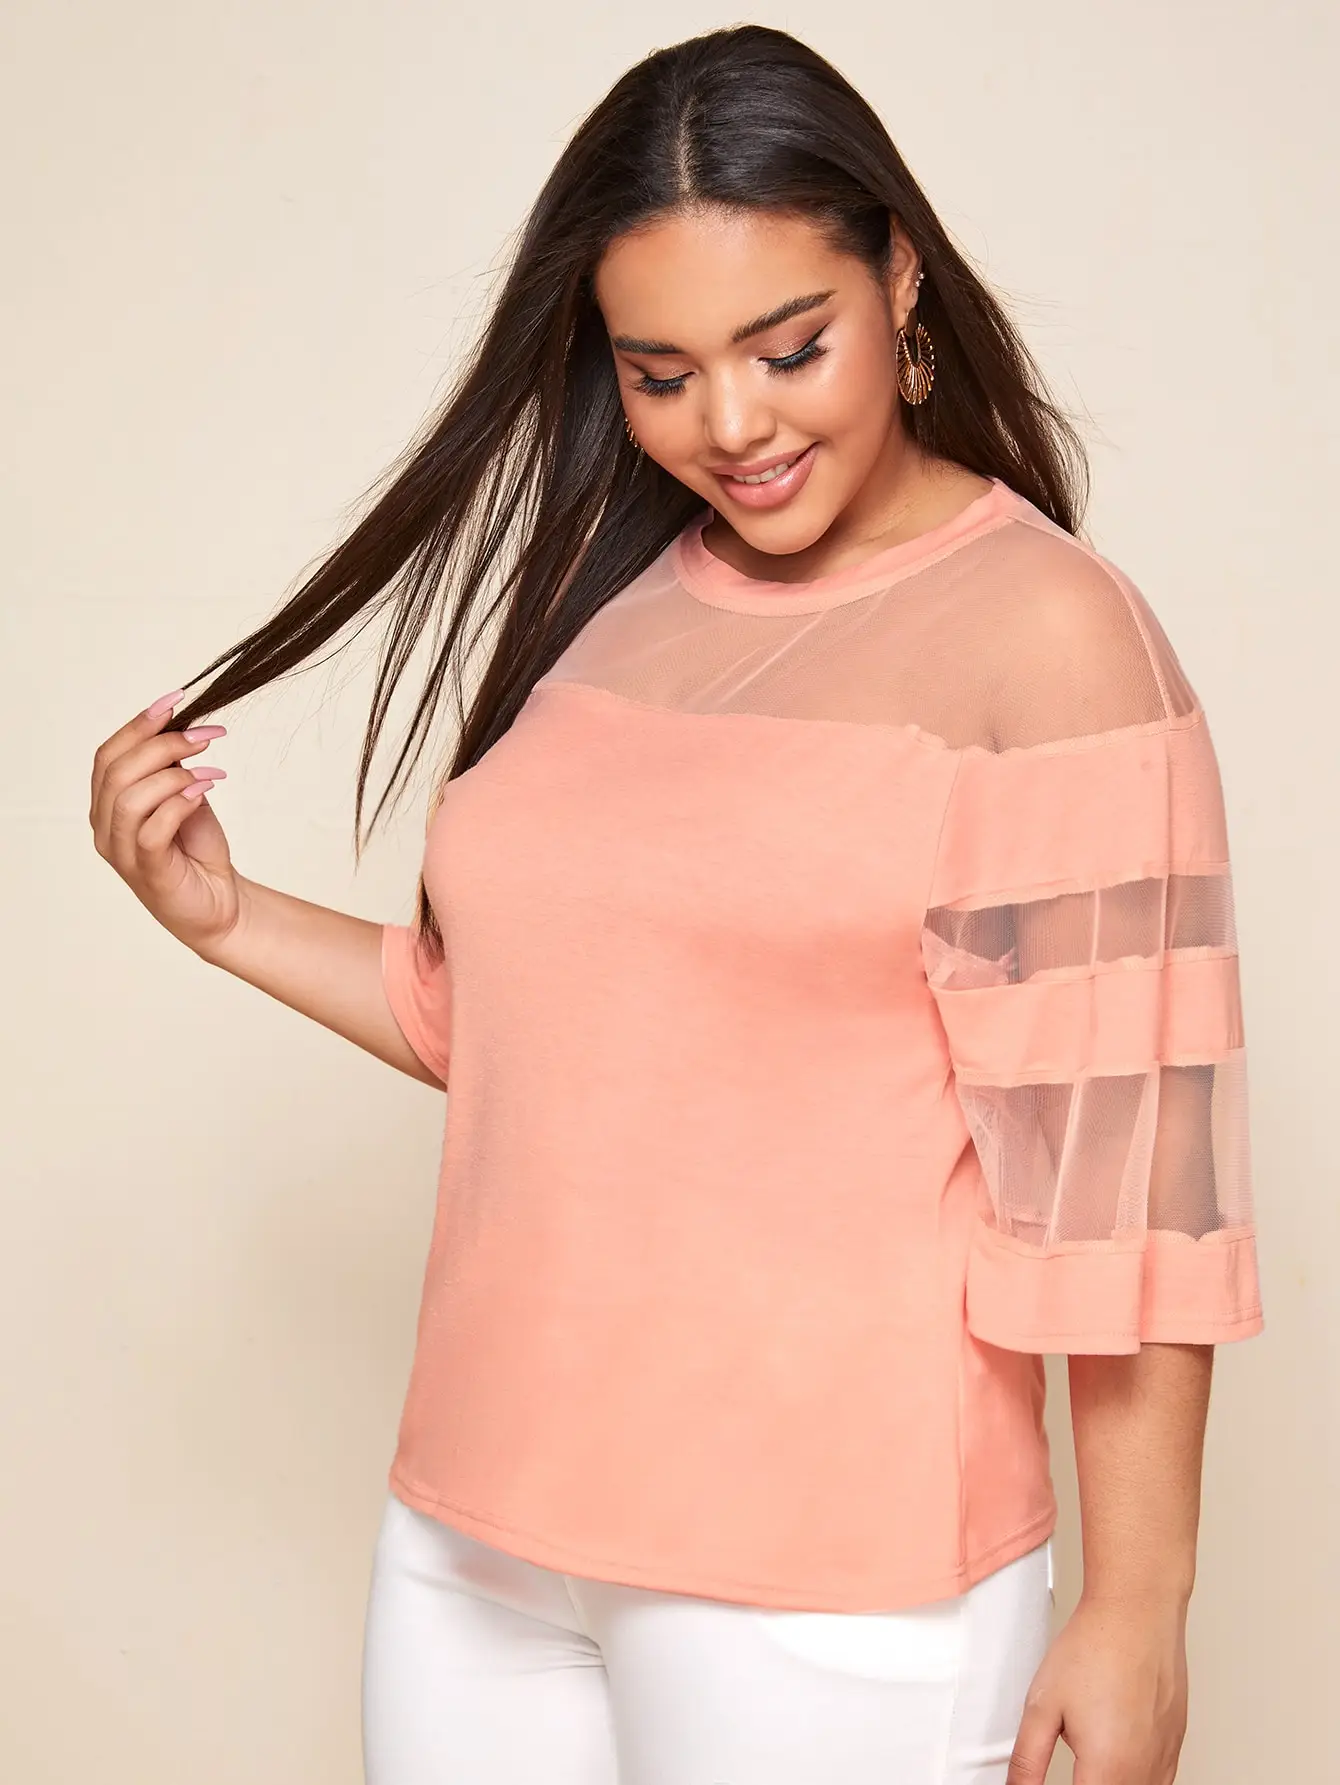 

Finjani Plus Size Women's T-shirt Contrast Mesh Flounce Sleeve Top Casual O-Neck Clothing For Summer New